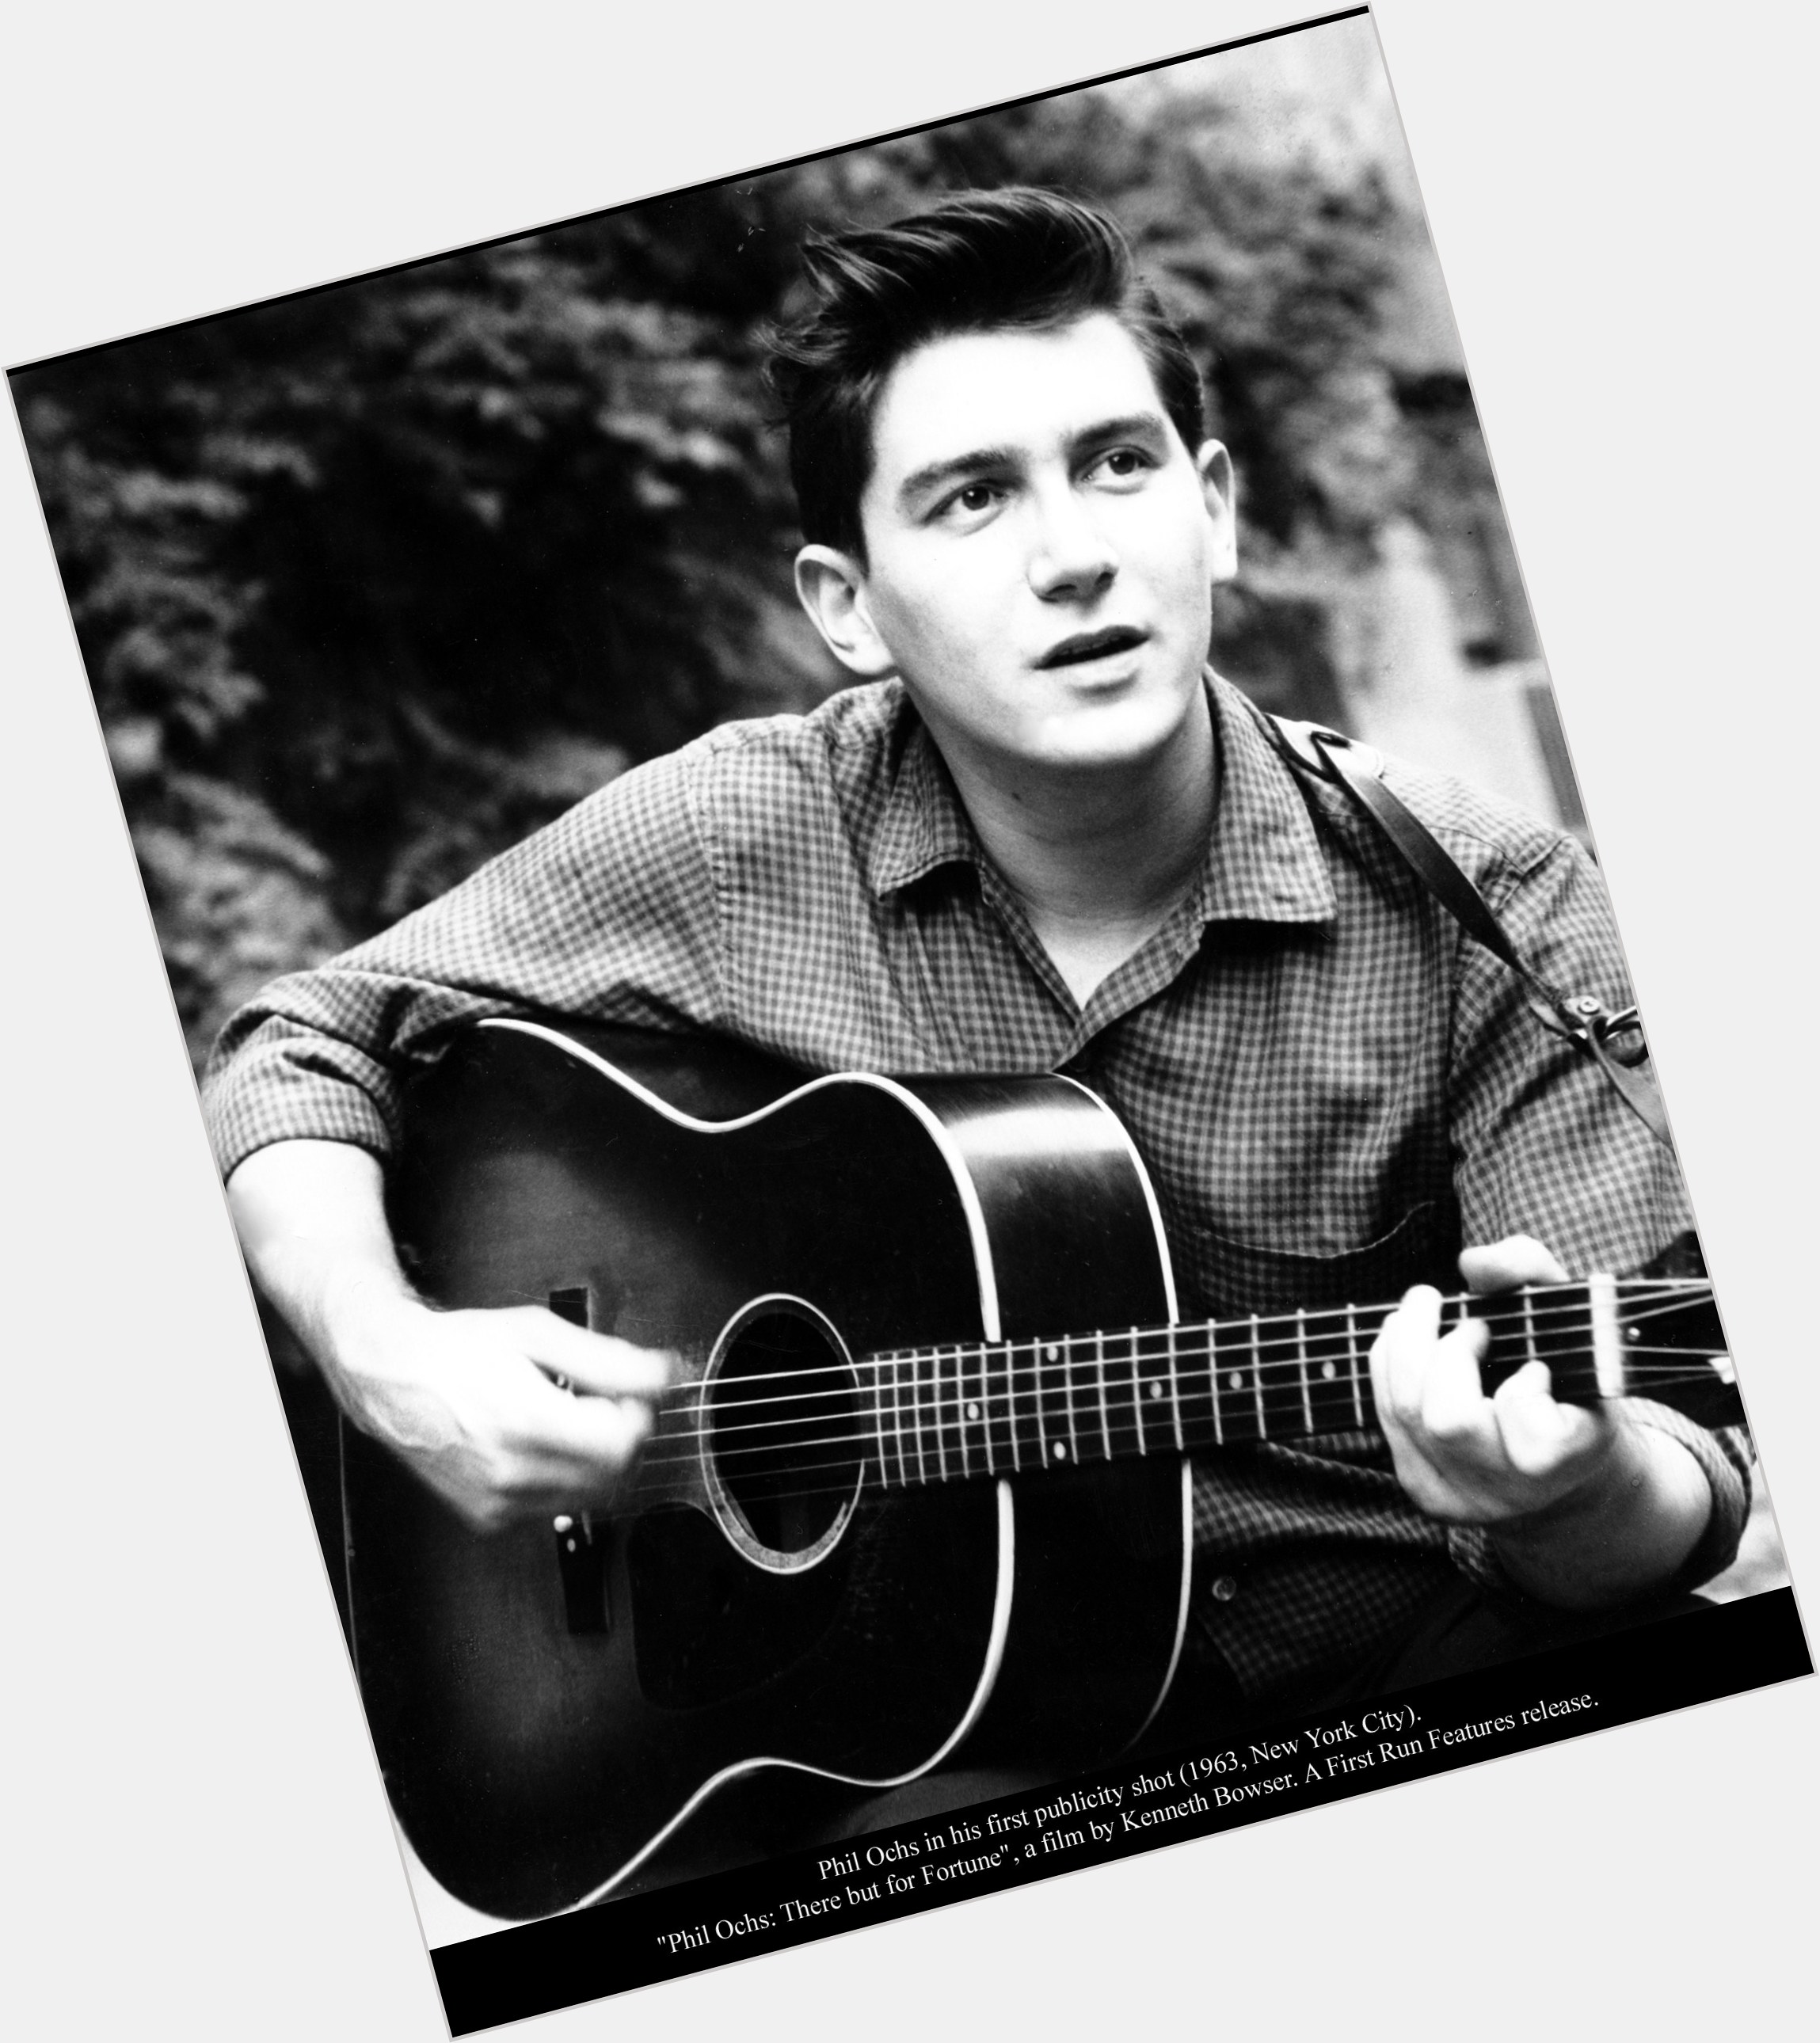 <a href="/hot-men/phil-ochs/is-he-alive-where-buried-what-background-perspective">Phil Ochs</a>  